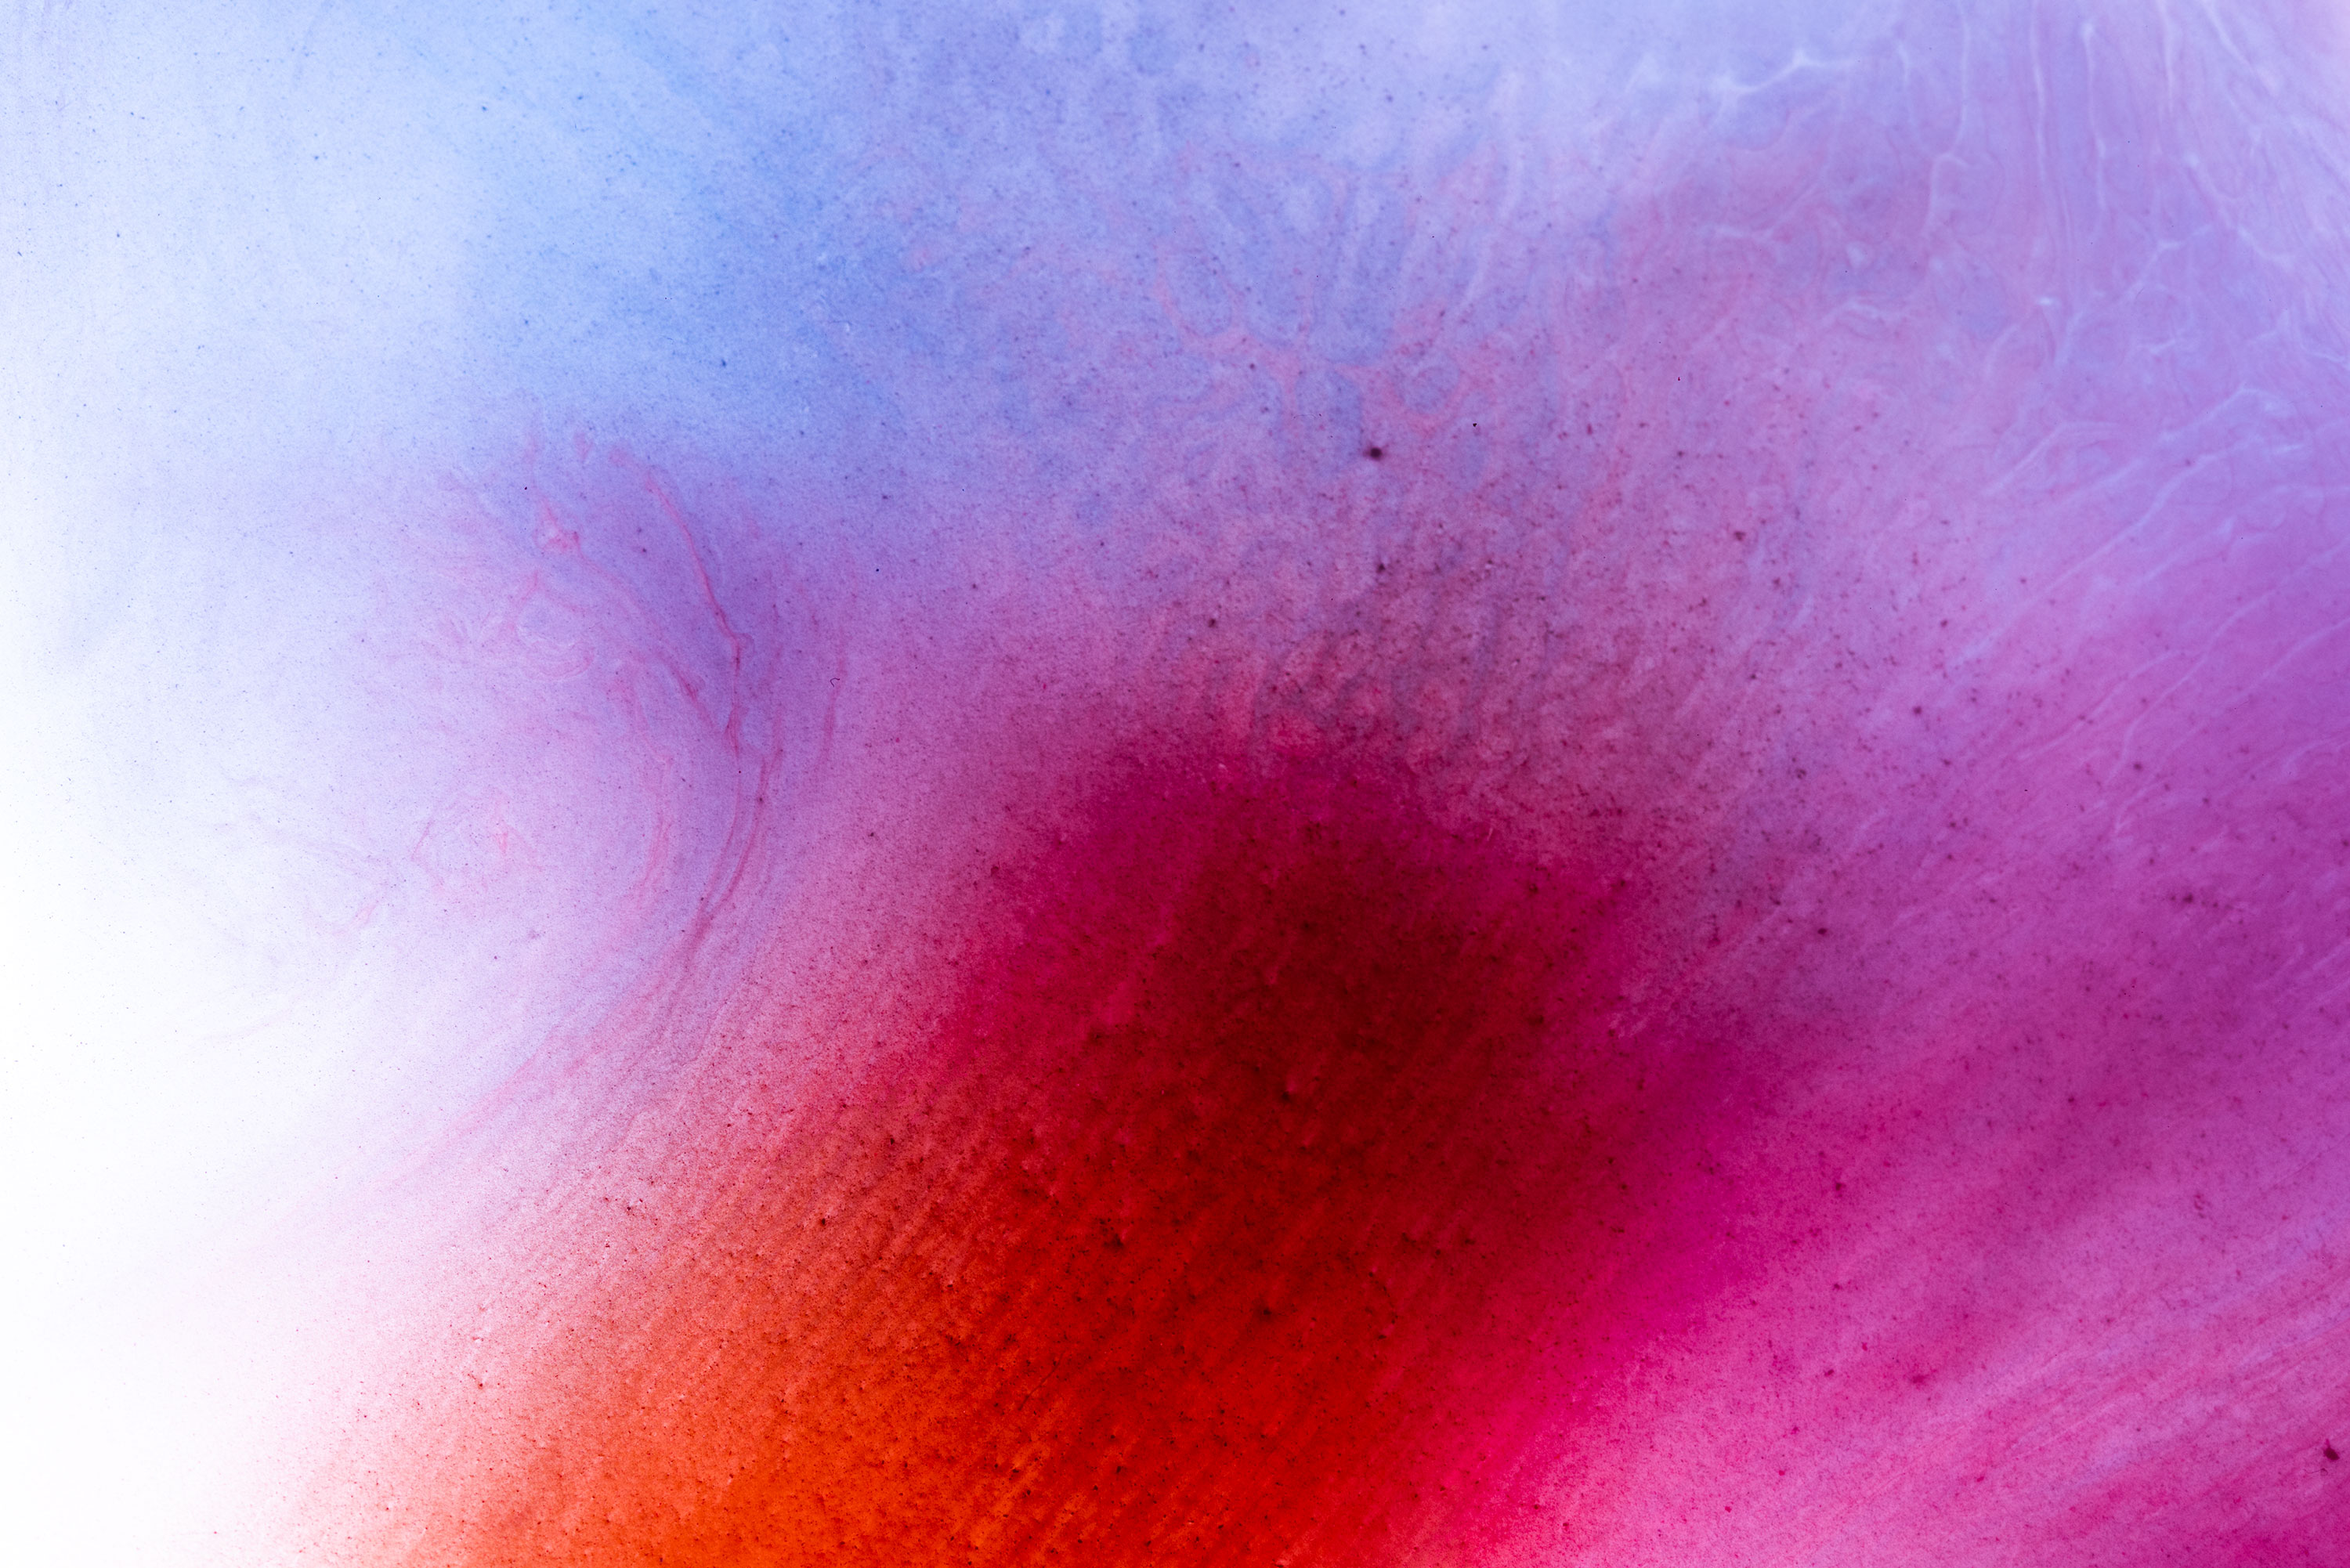 Abstract photography made of orange and blue watercolour. Image by Jennifer Esseiva.